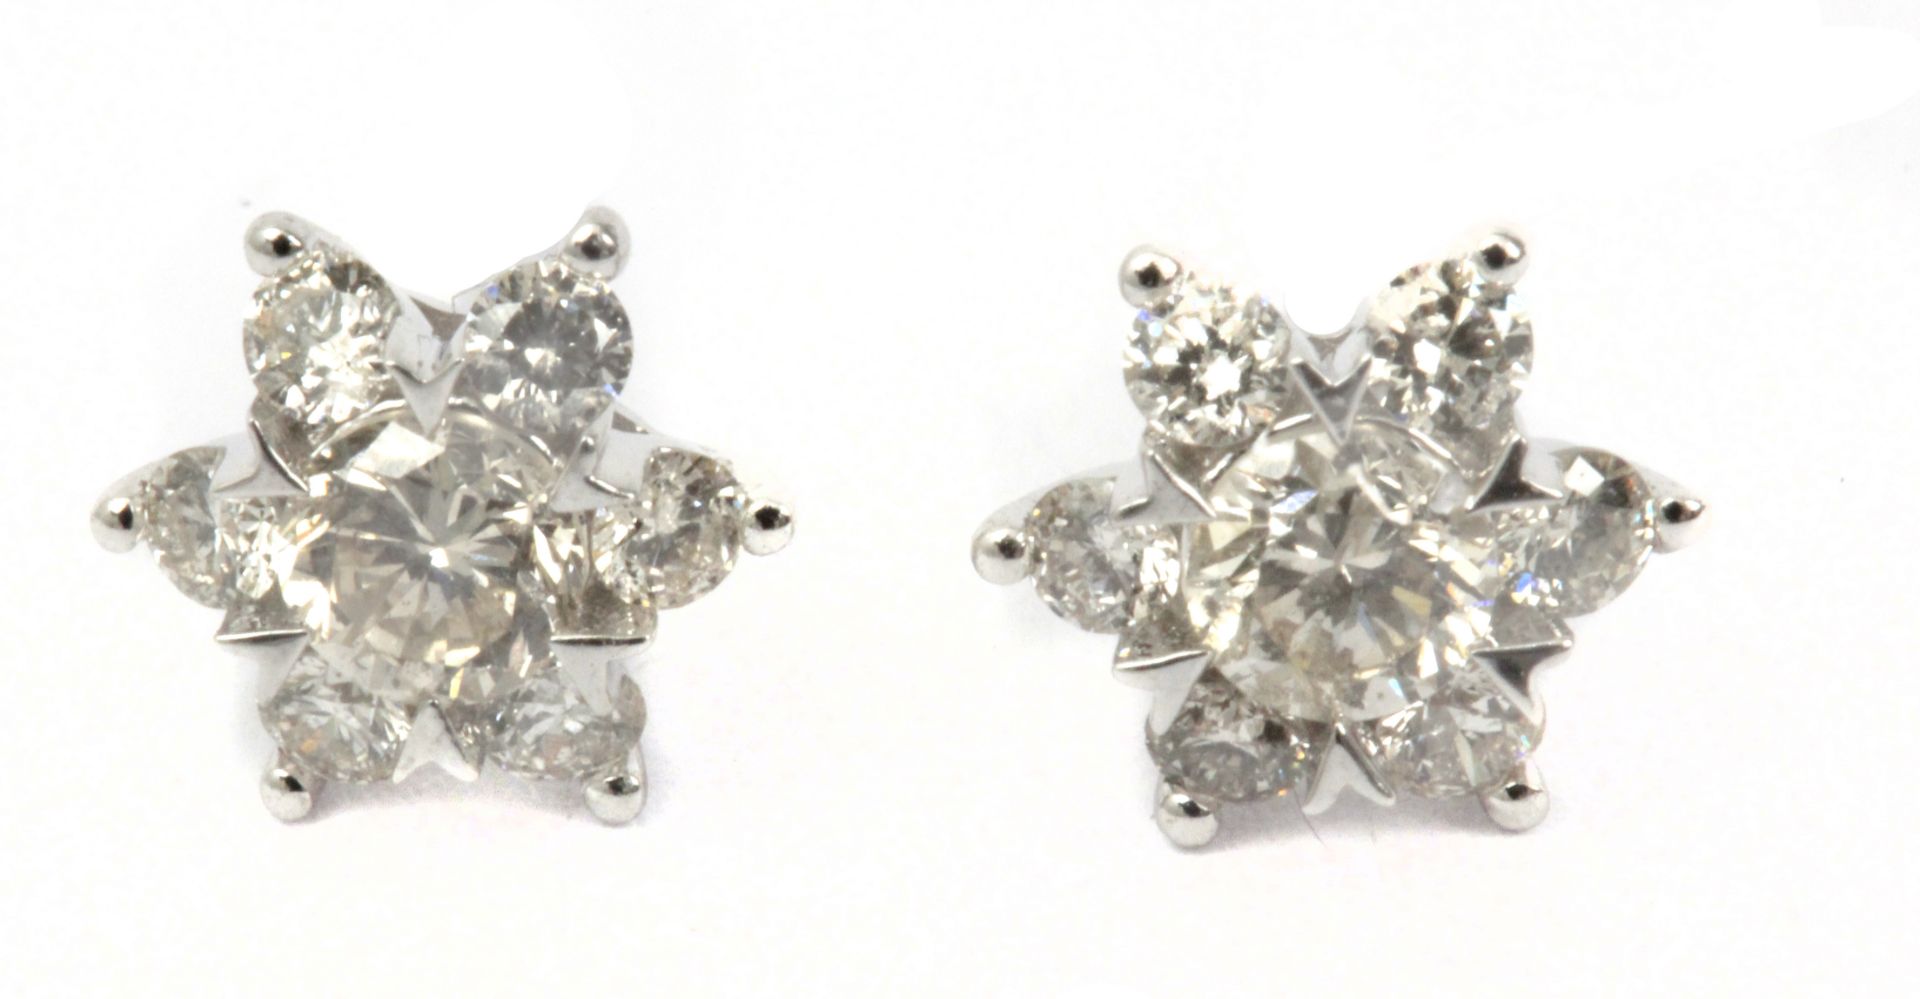 A pair of star shaped stud earrings in an 18k. white gold setting with brilliant cut diamonds